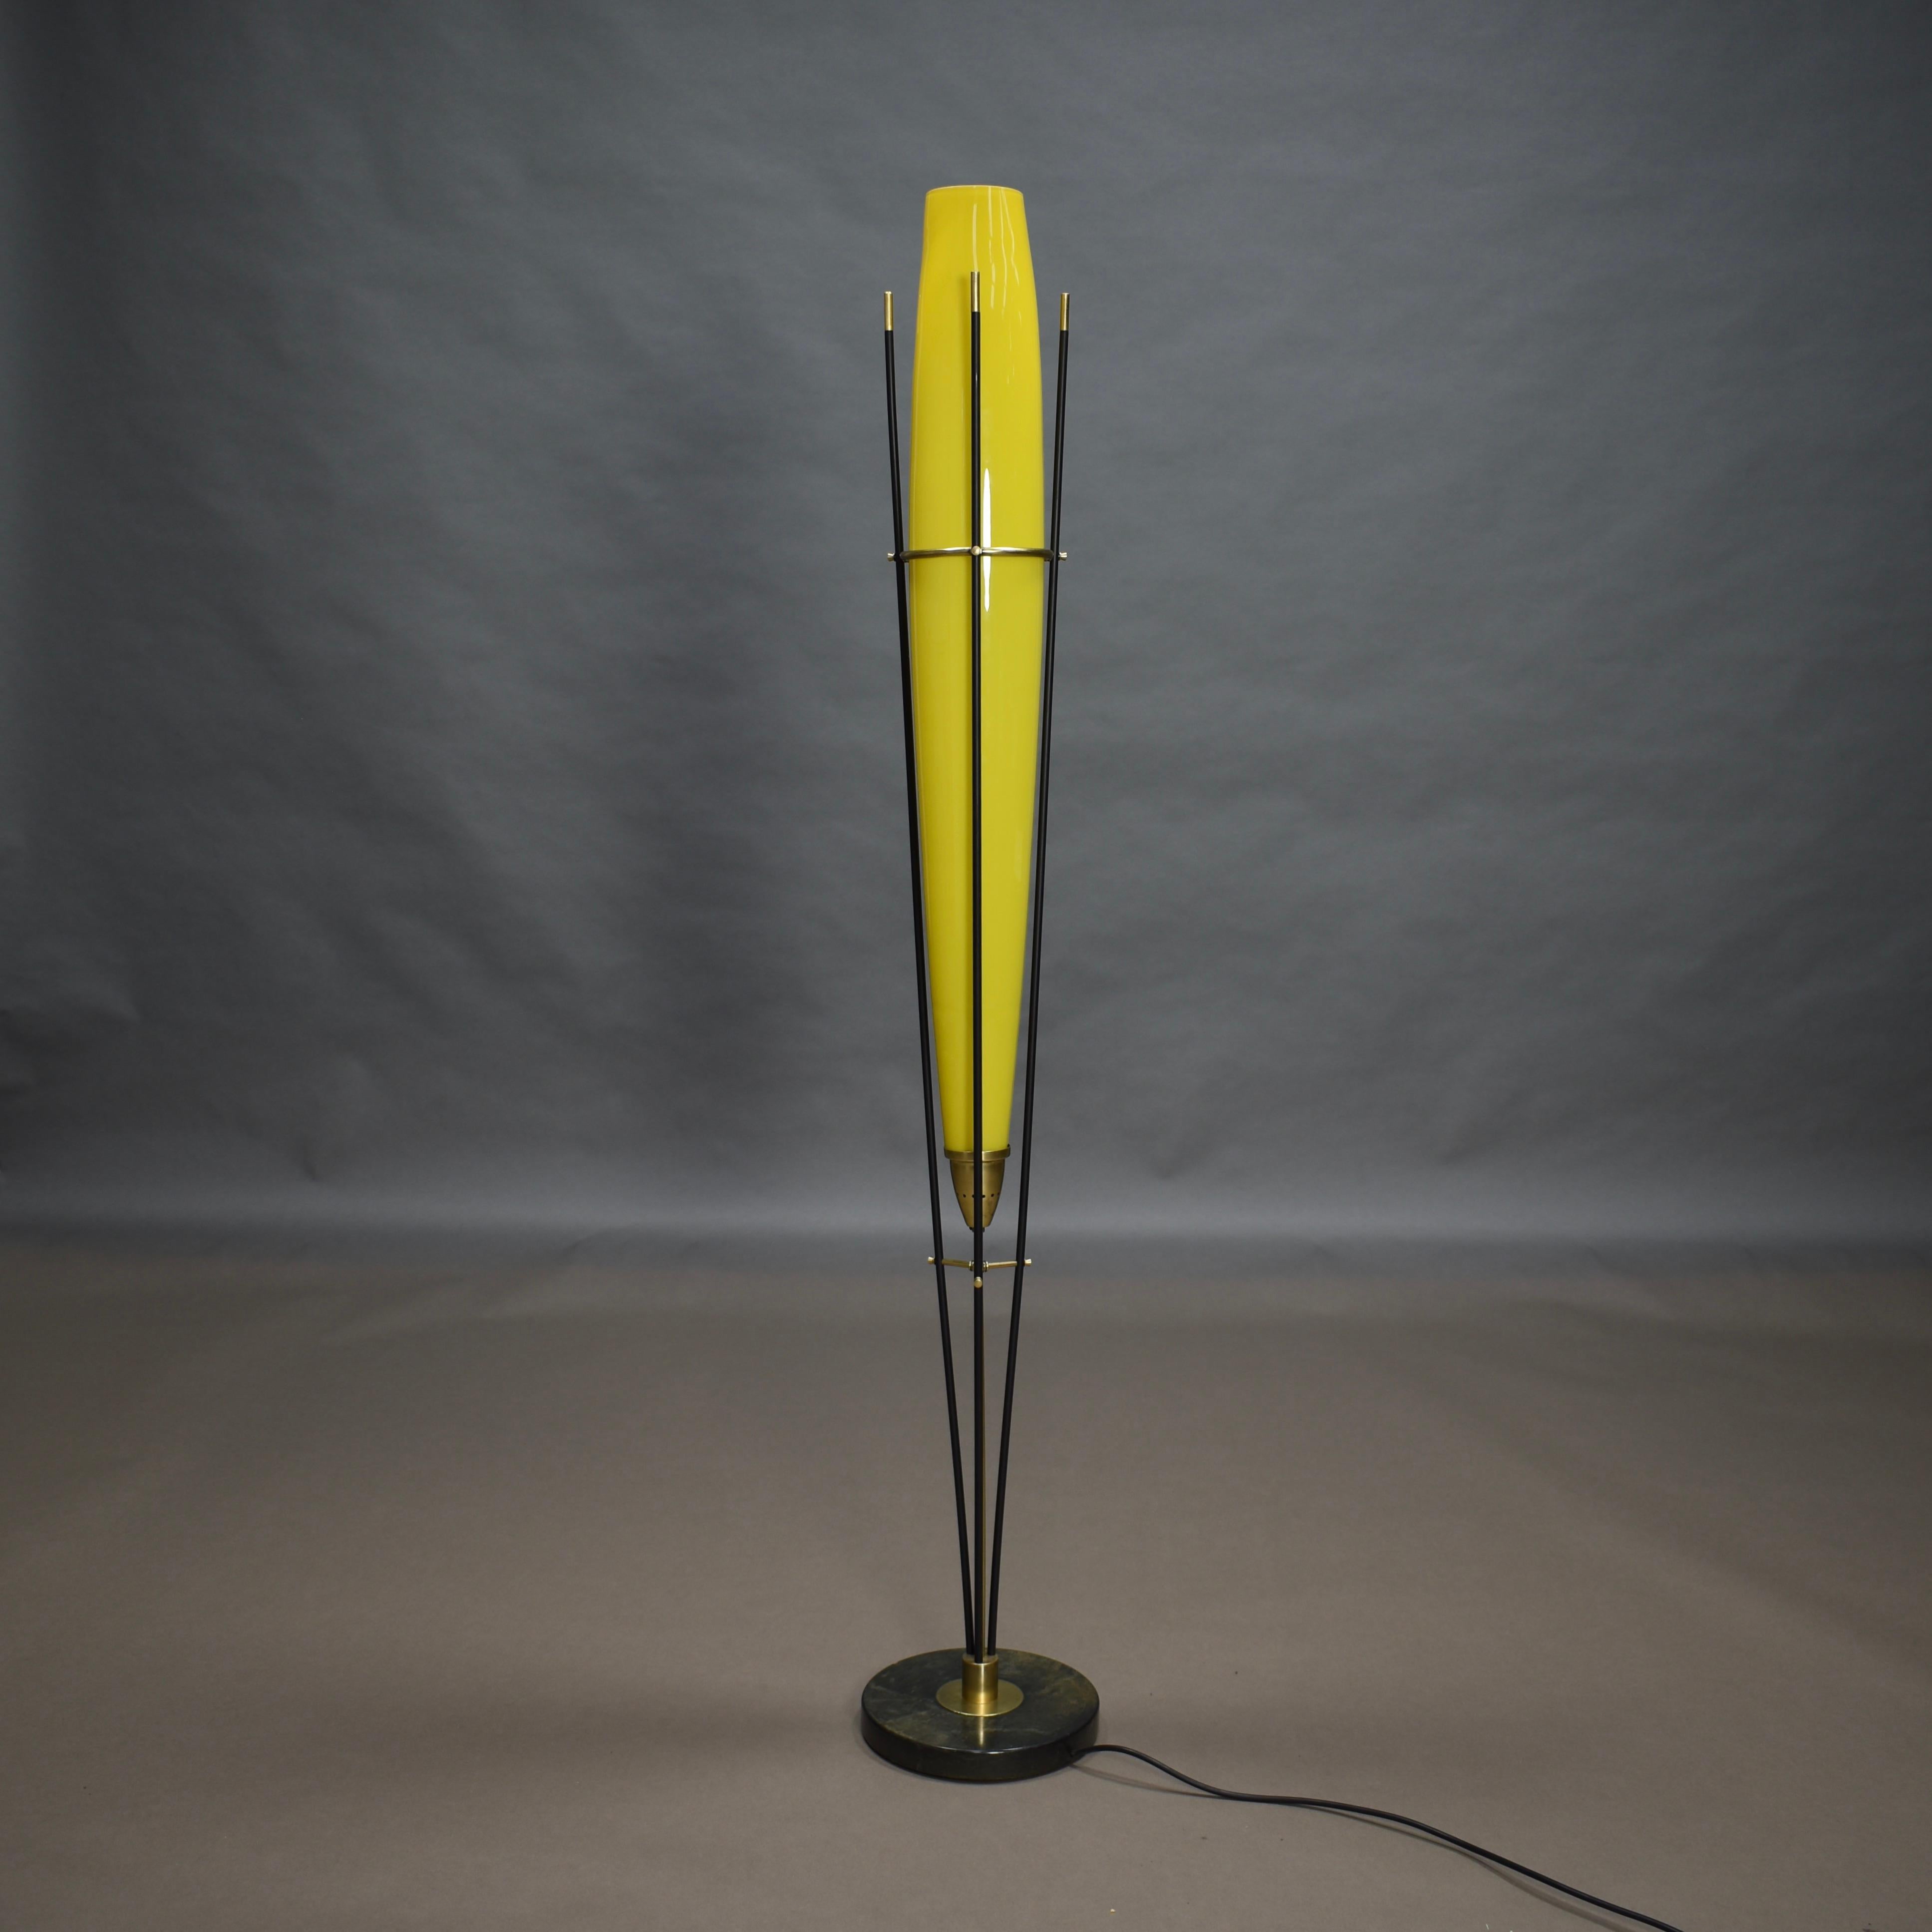 Stunning rocket shaped Vistosi floor lamp in yellow glass, brass and granite foot by Alessandro Pianon, Italy, circa 1950. Very elegant and exclusive piece. A real eyecatcher.

Designer: Alessandro Pianon

Manufacturer: Vistosi

Country: